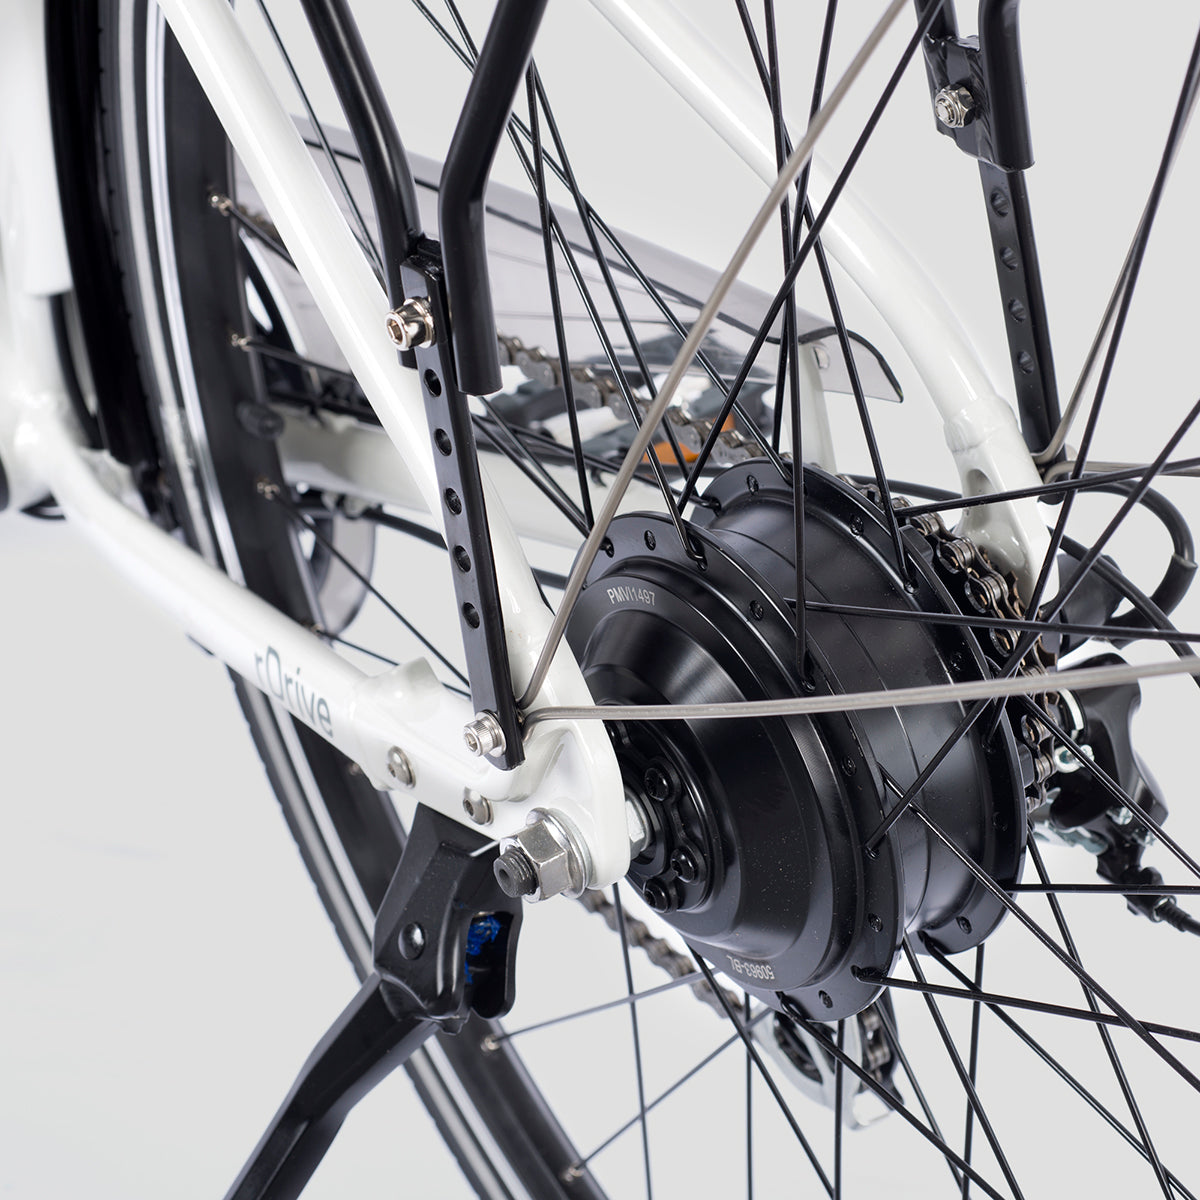 Danish-engineered rear hub that gives assistance up to 16MPH on gray background